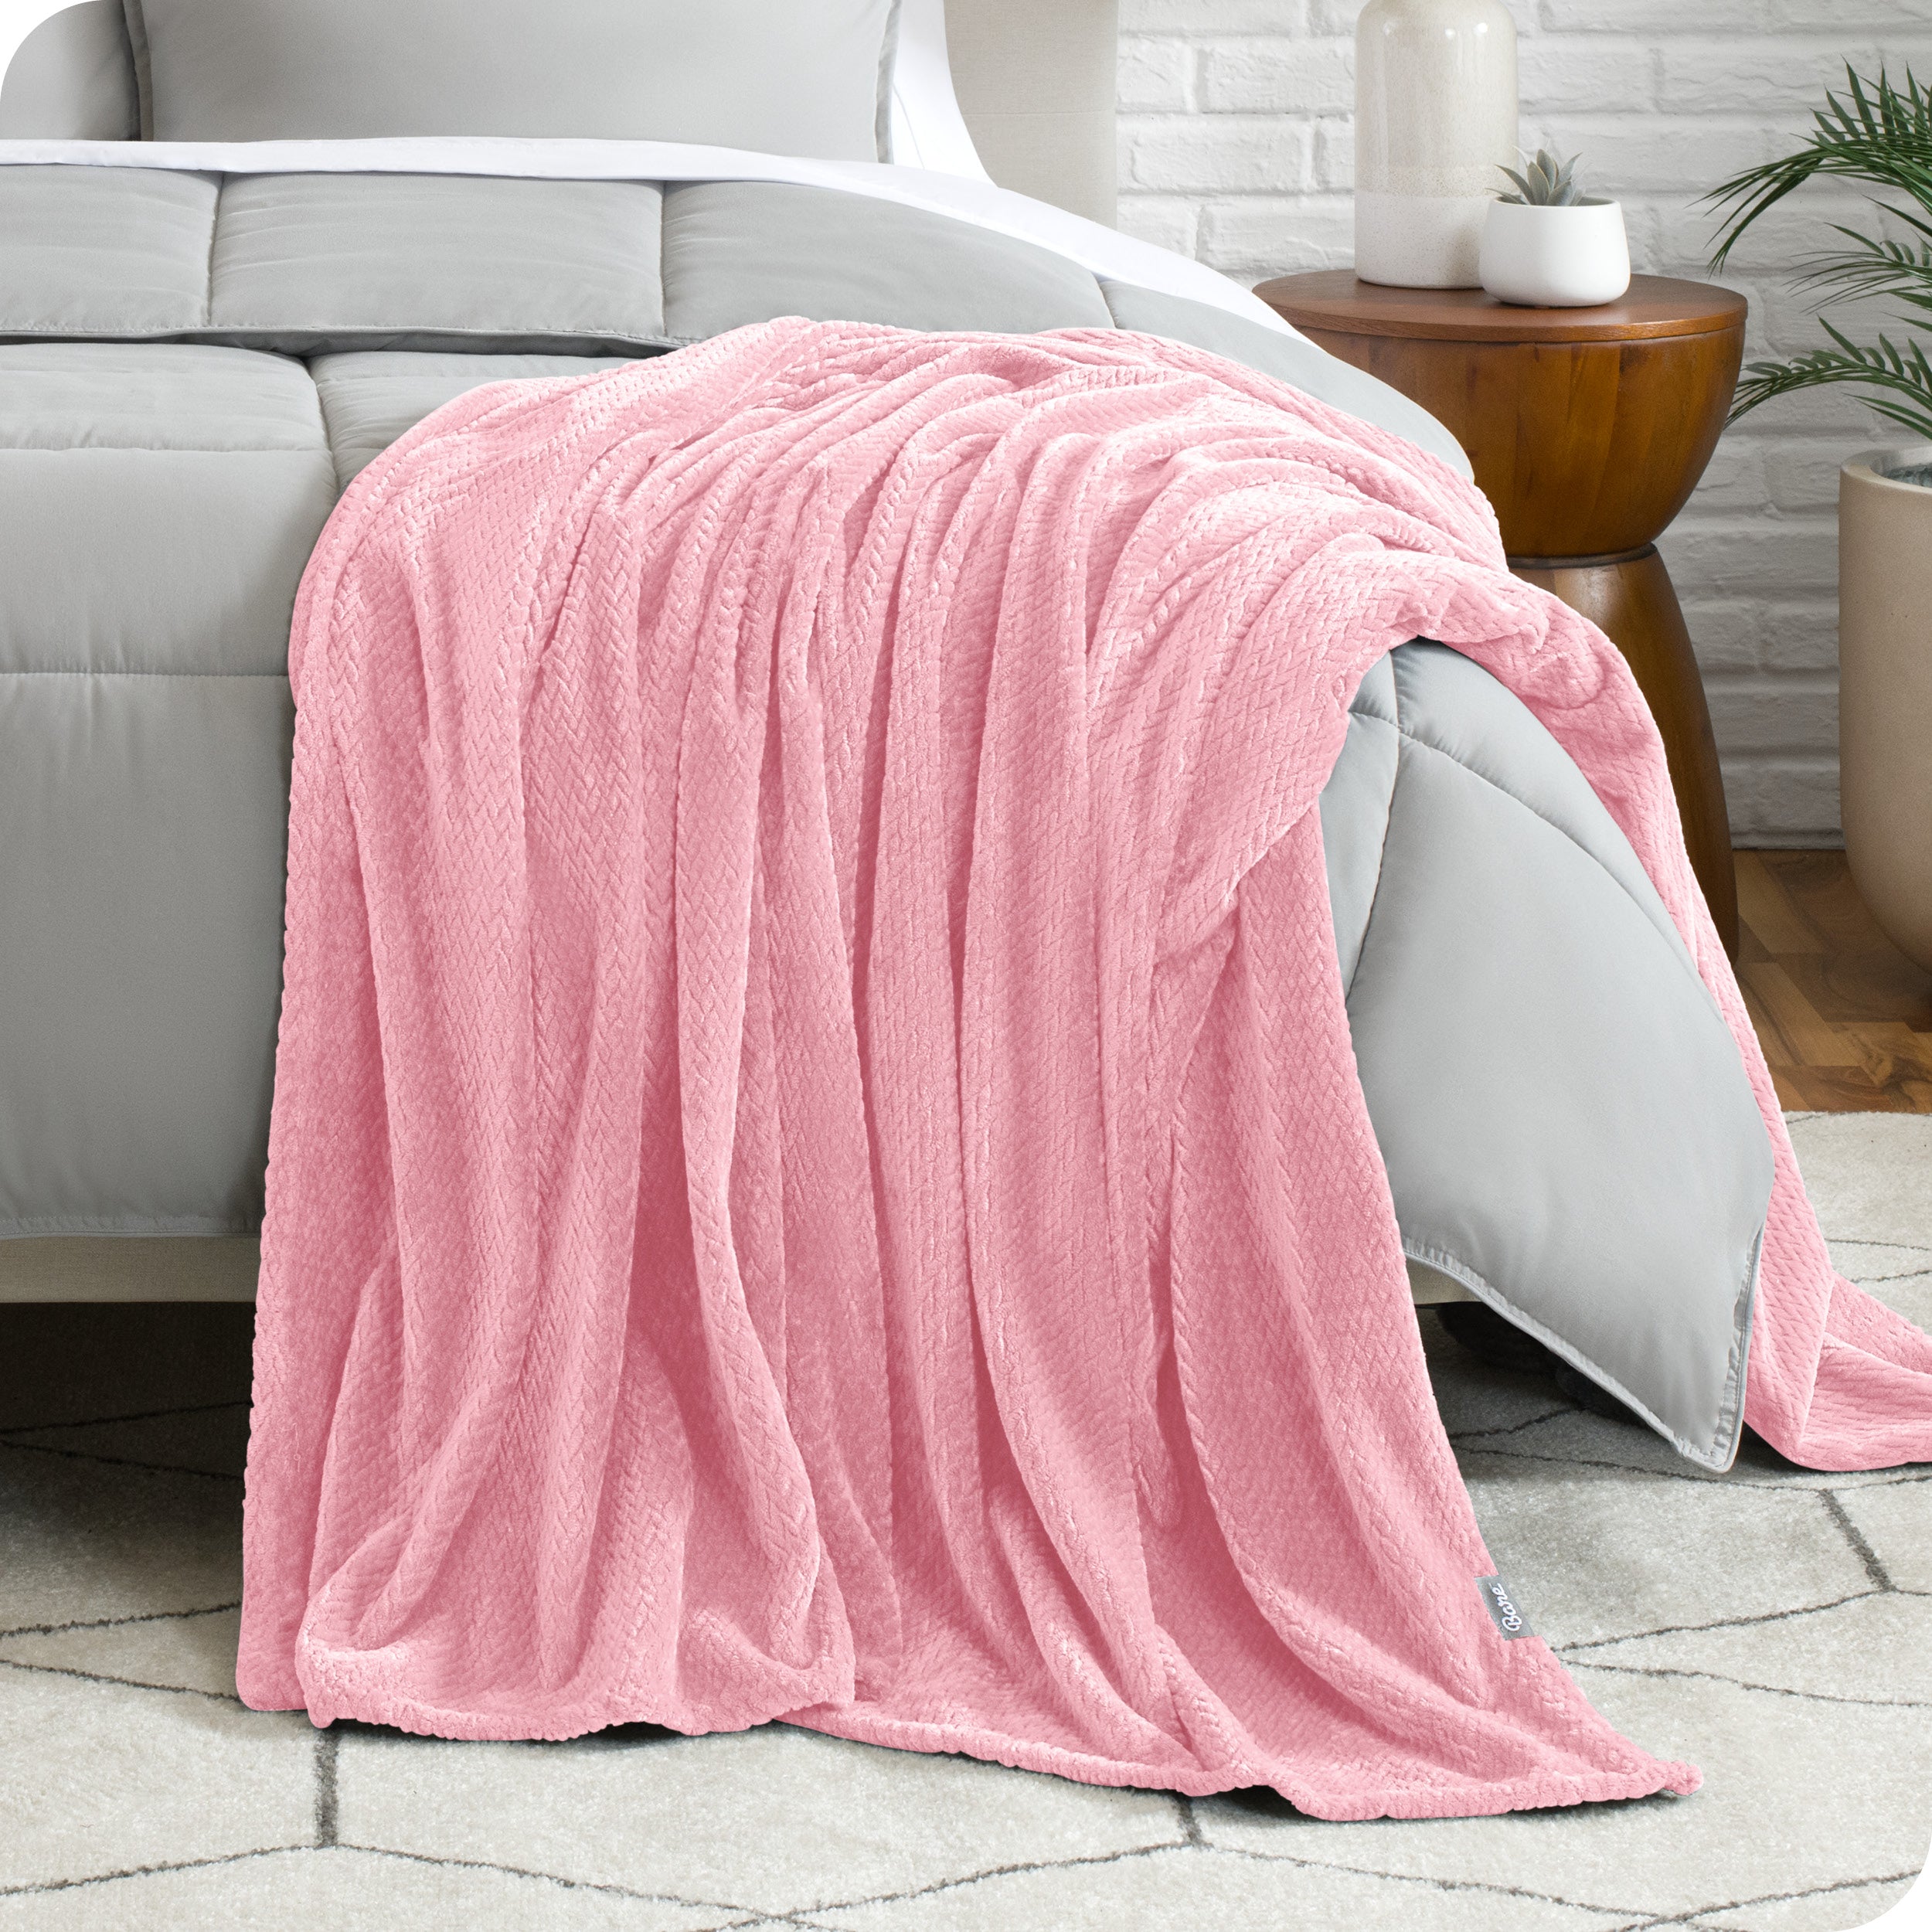 A microplush blanket is draped over the side and bottom of a neatly made bed.